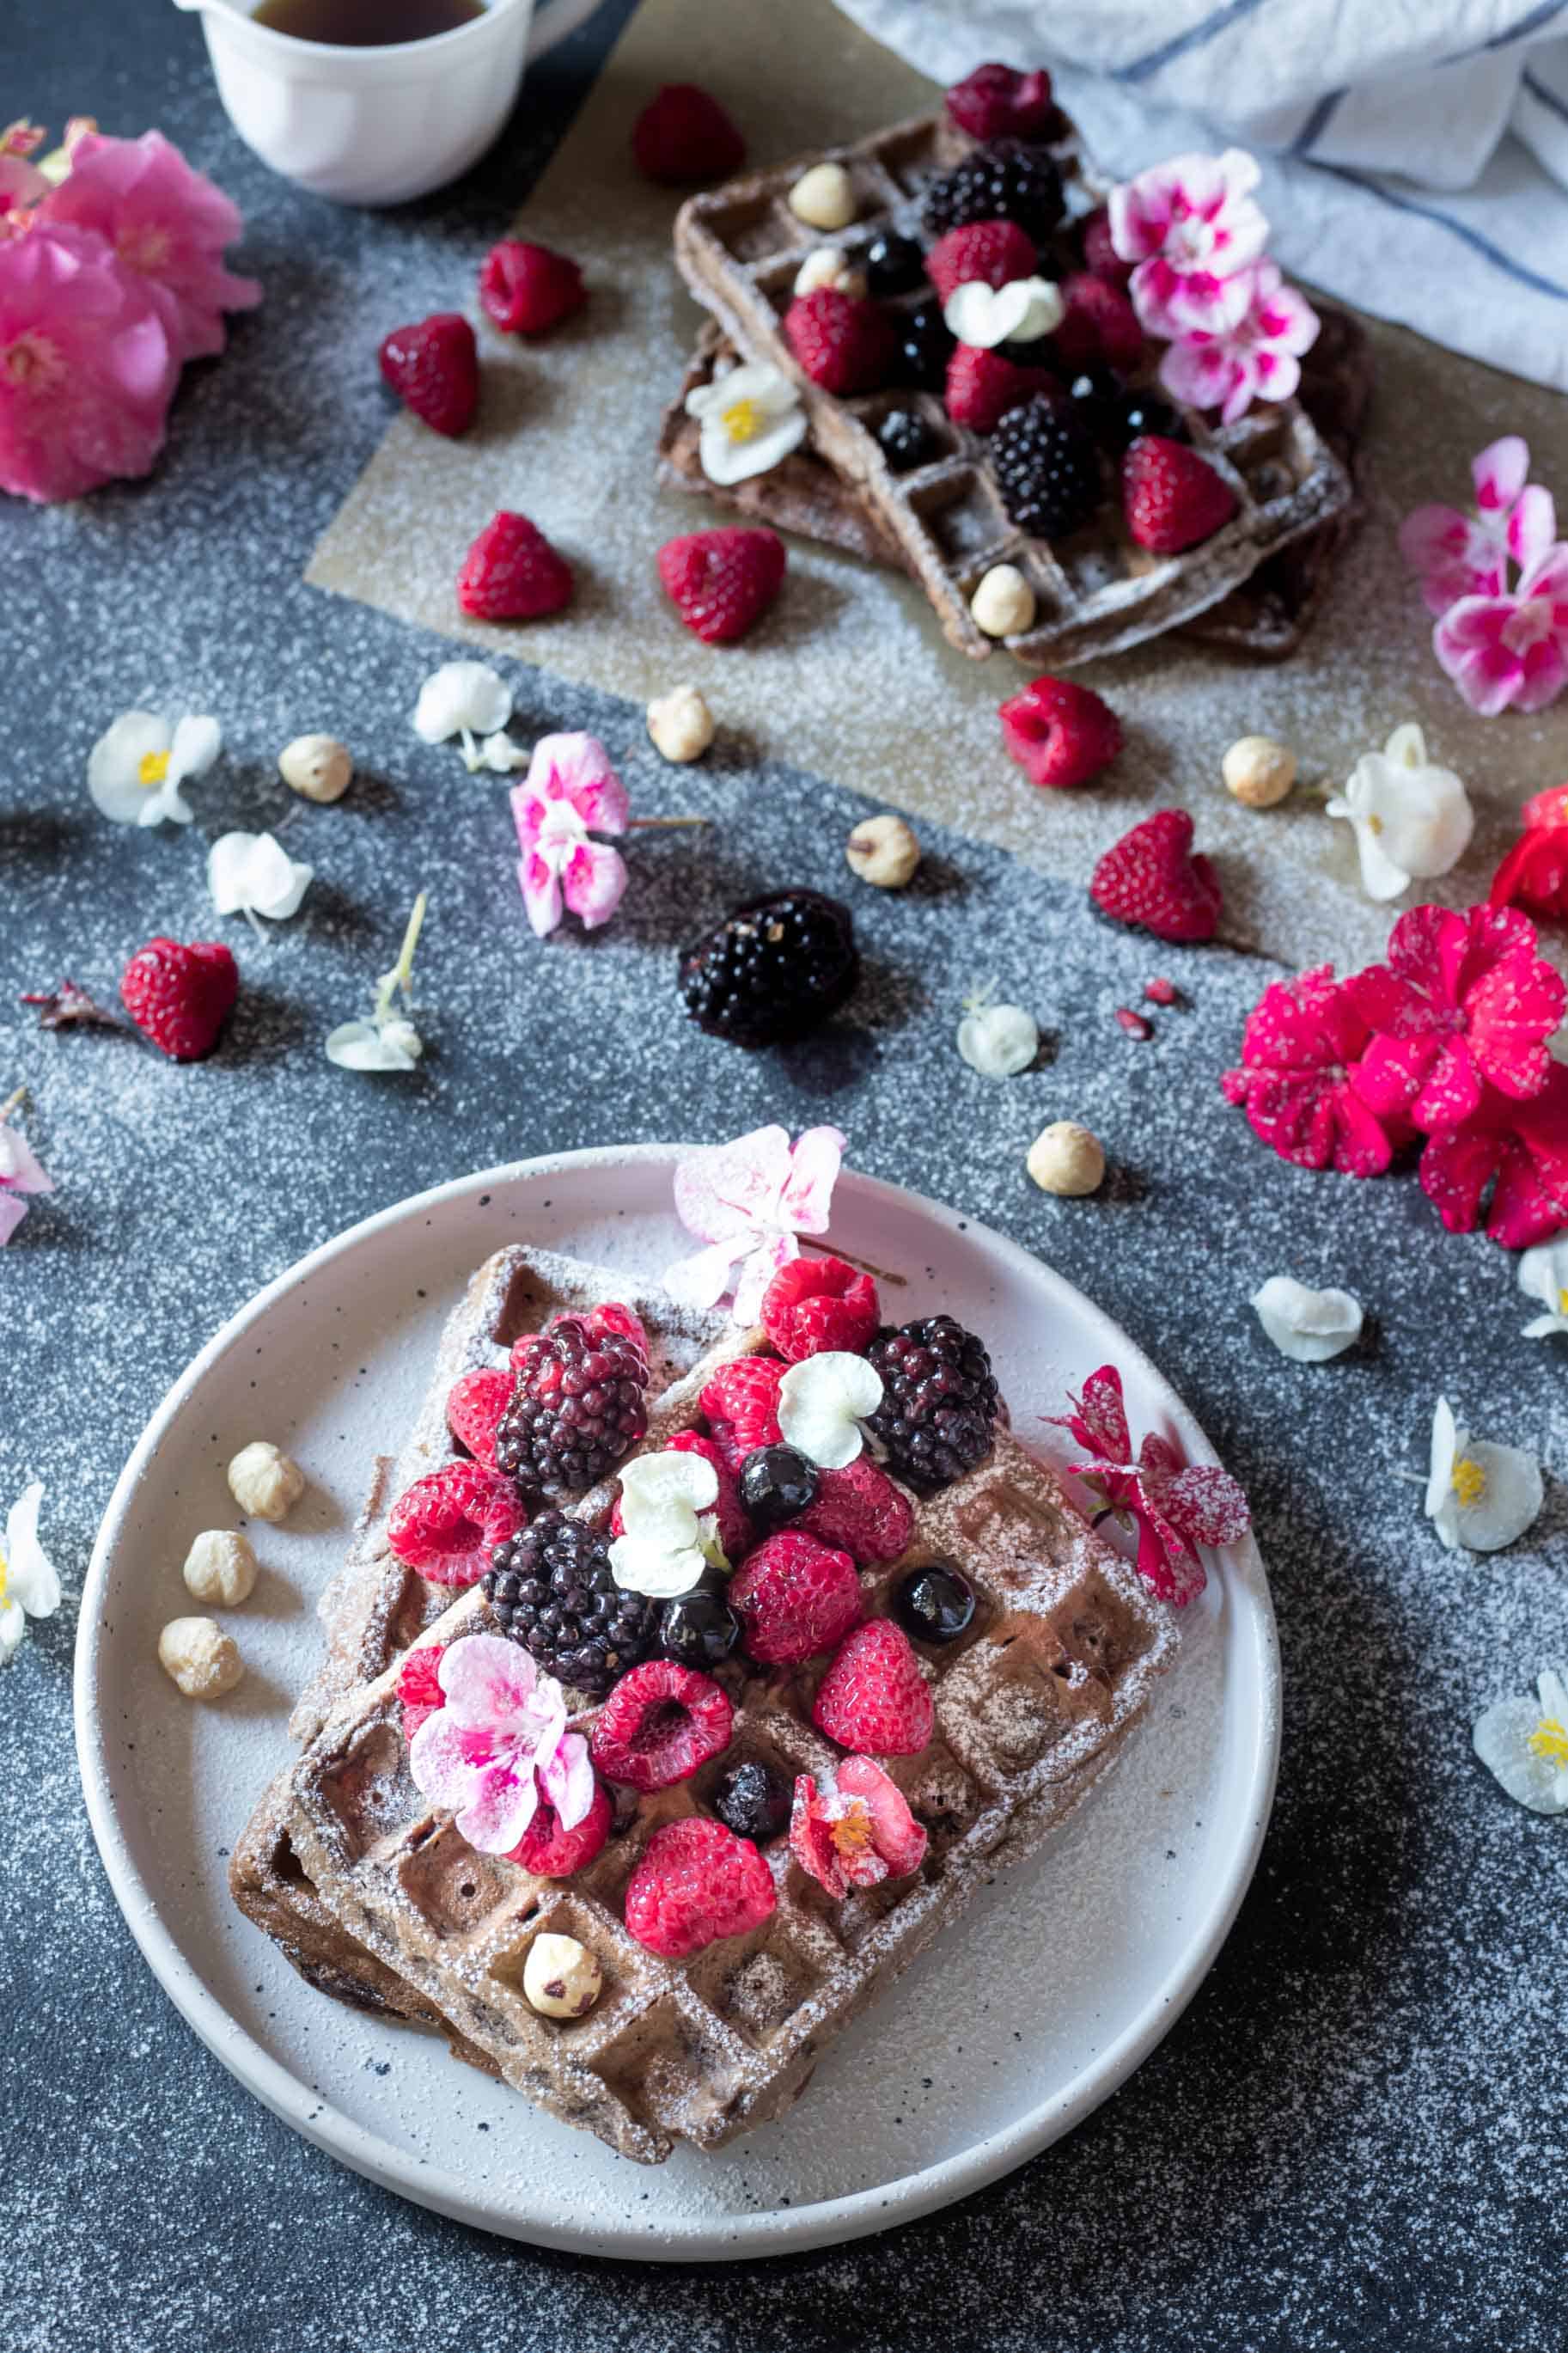 Low FODMAP and Gluten-Free Chocolate Waffles. Only 10 ingredients, simple, flavorful, fluffy, chocolatey and so yum. Perfect indulging breakfast or brunch.